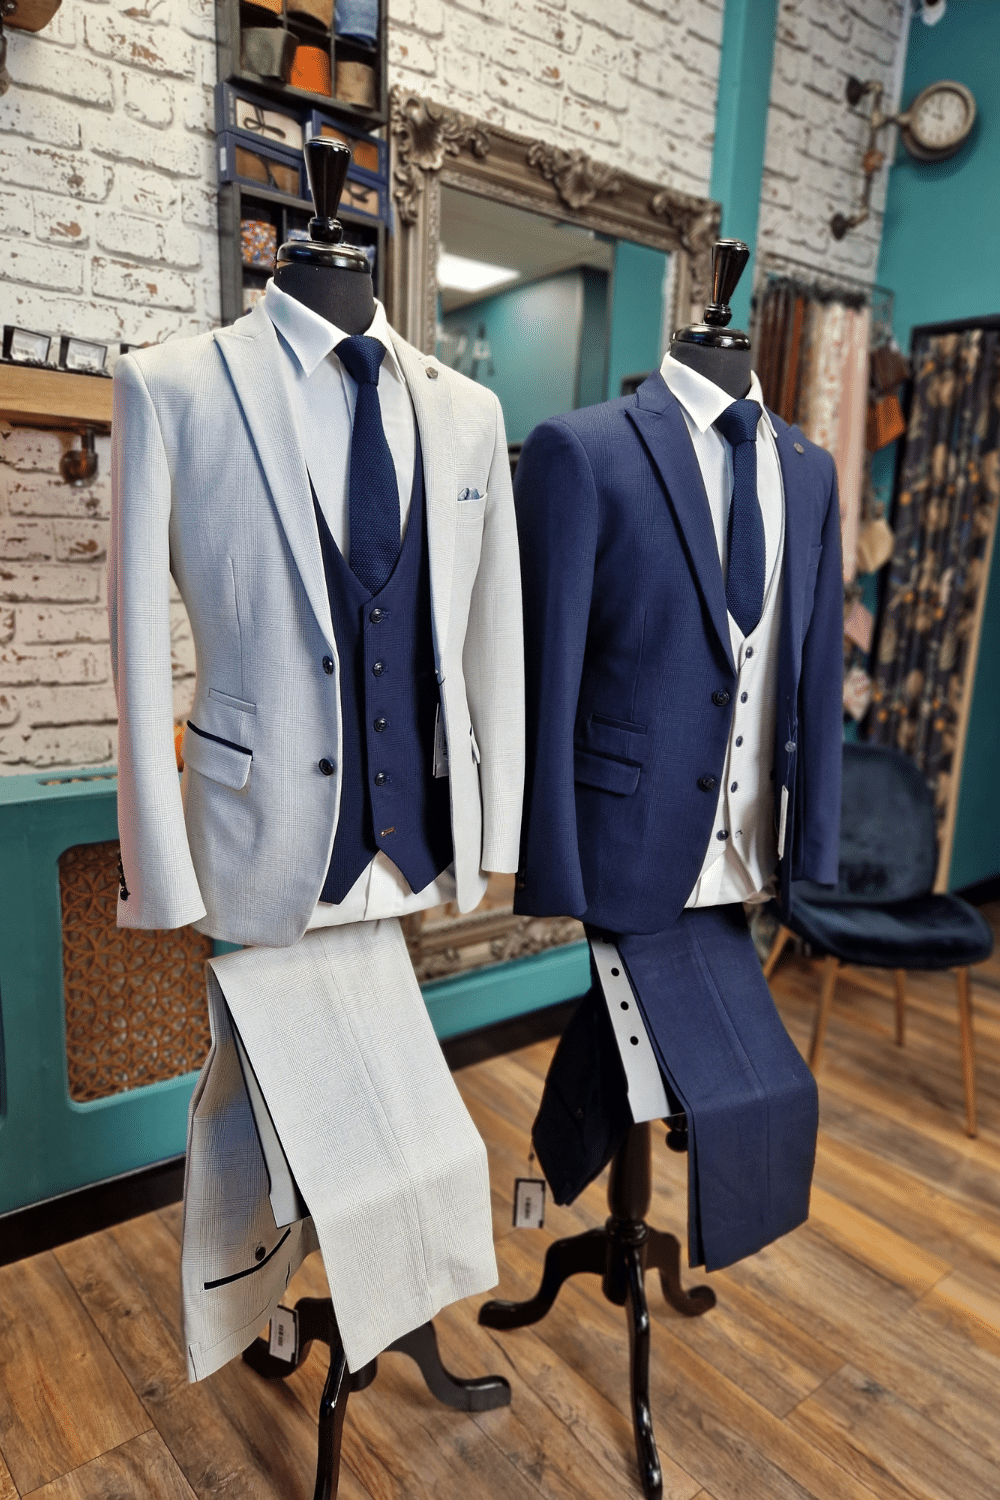 Two wedding suits dressed on mannequin's